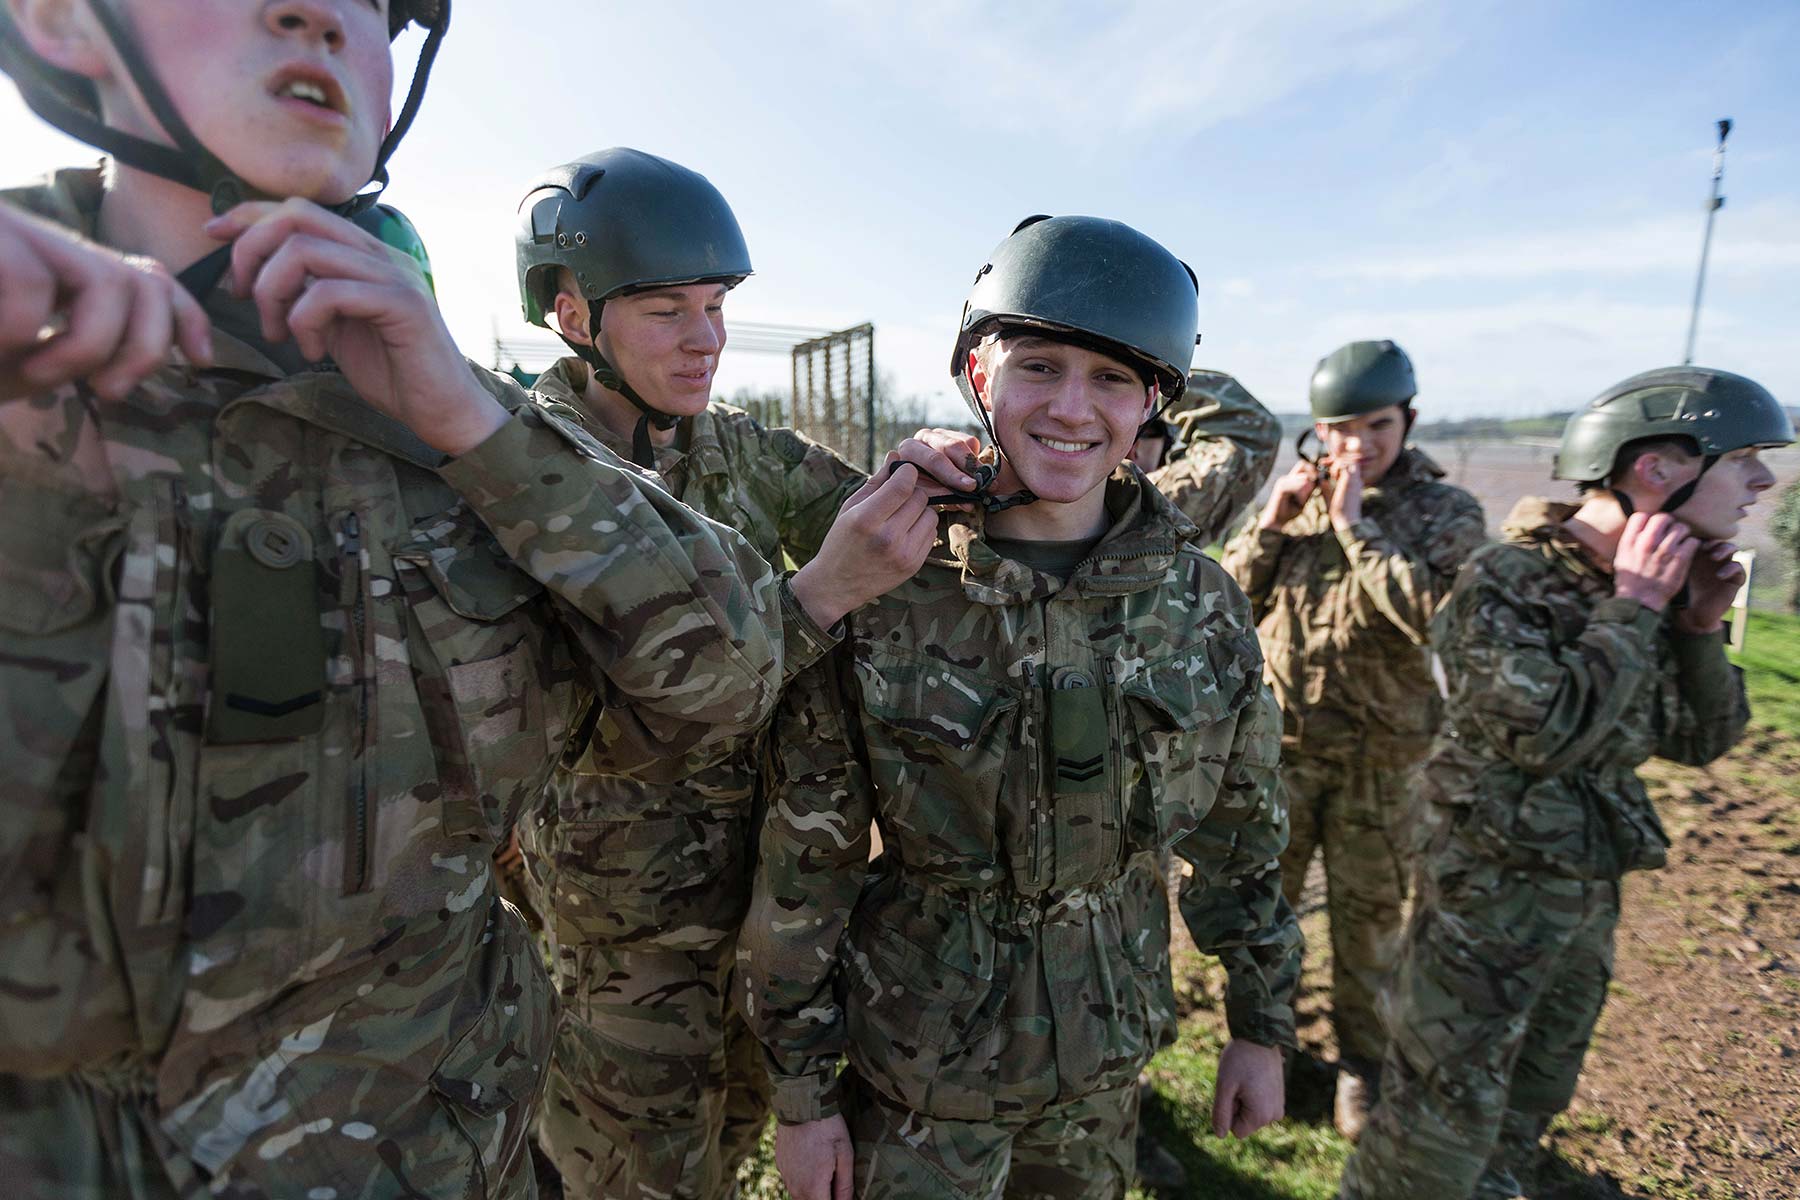 Royal Marine cadets in camouflage for outdoor activity